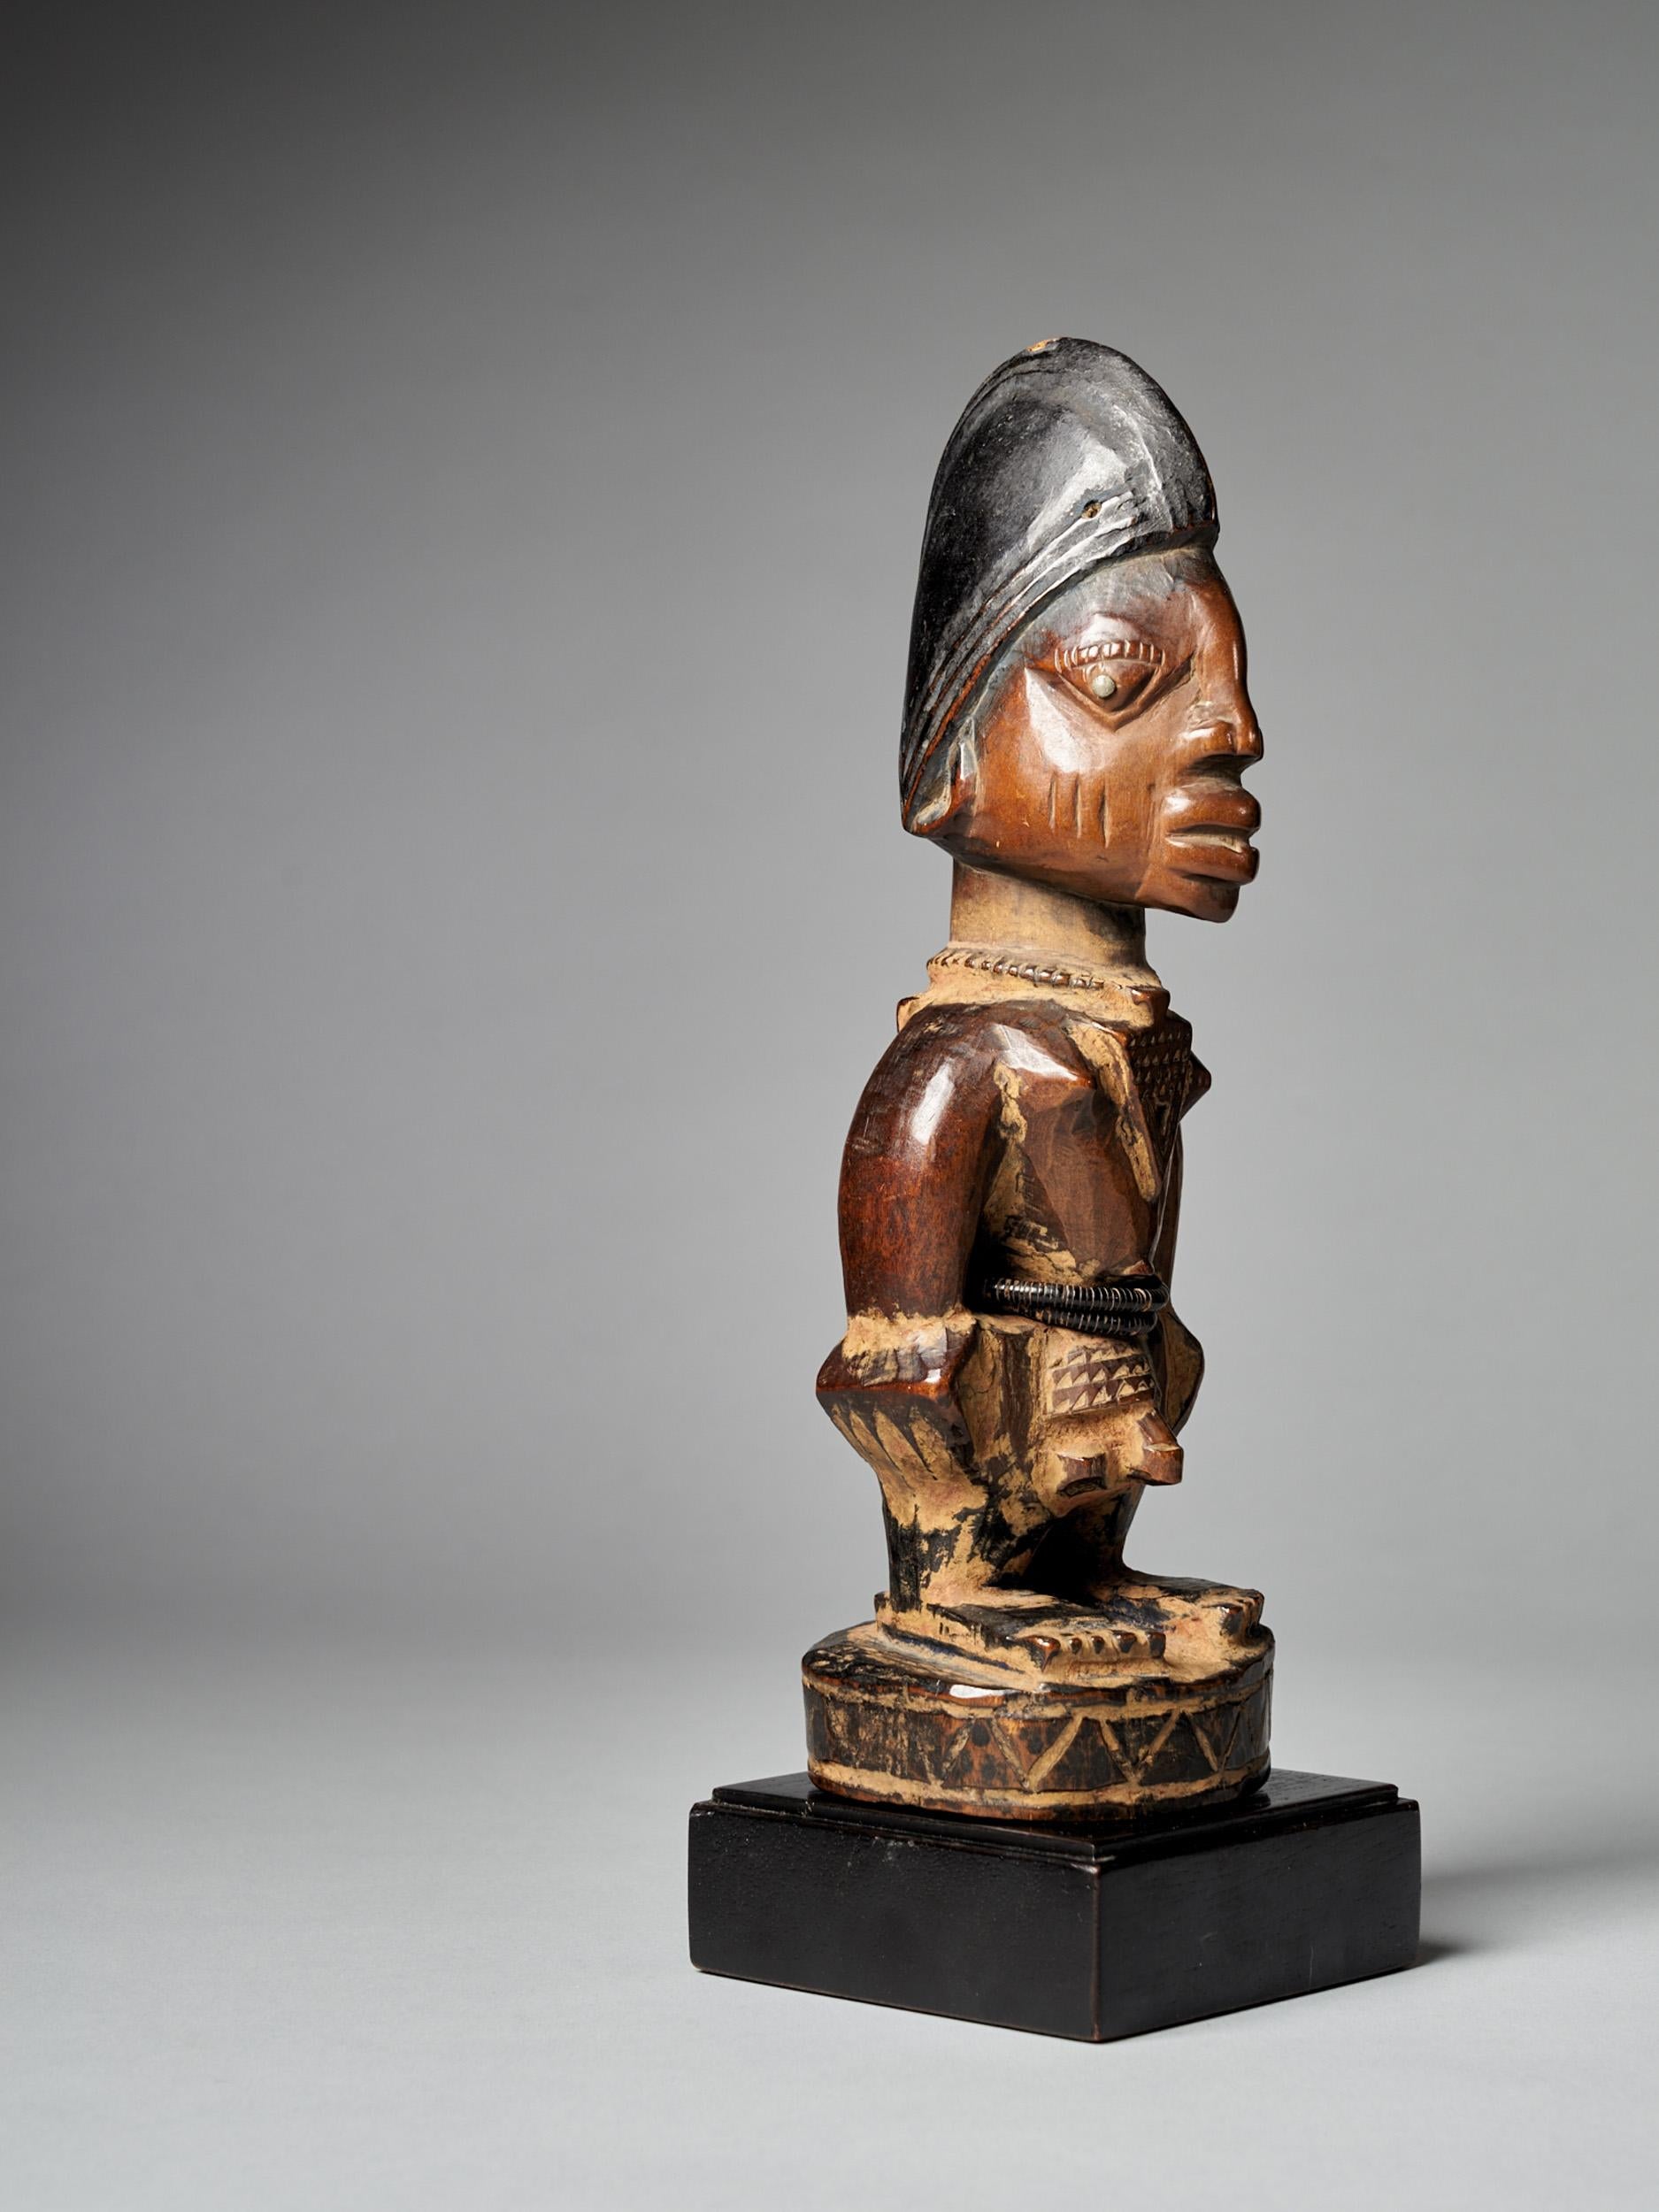 A finely carved significant Yoruba Male Ibeji figure with a tall headdress, expressive eyes, original bead belt and heavy wear and polish from native use. Areas of encrusted camwood powder between arms and around feet. Though the cause of the high